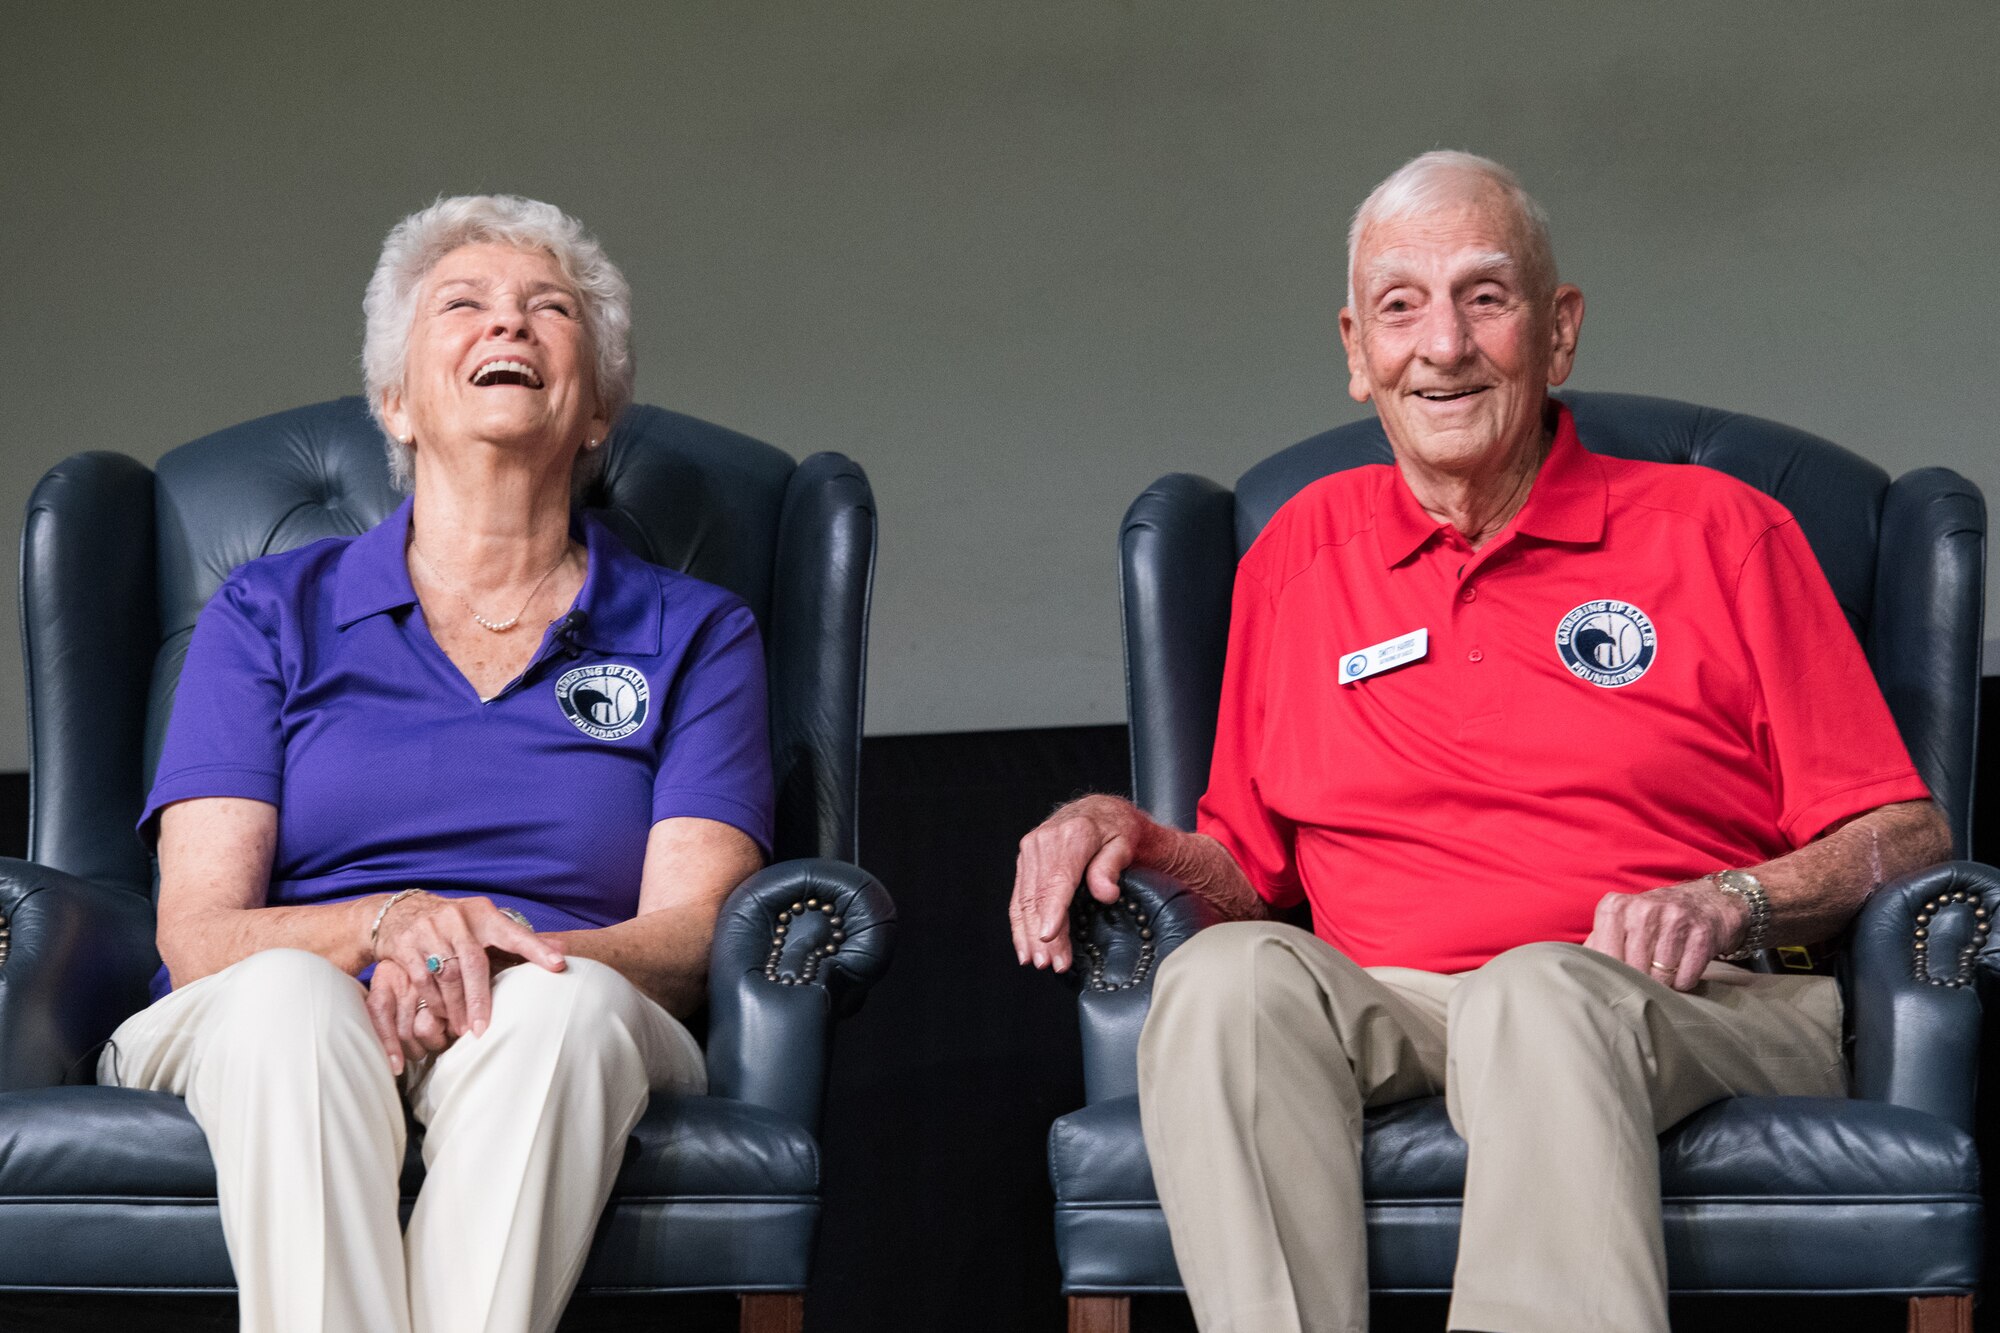 Retired Col. Carlyle “Smitty” Harris, and his wife, speak with Air Command and Staff College students, May 29, 2019, during the 38th annual Gathering of Eagles at Maxwell Air Force Base, Alabama. Harris was selected as an Eagle for his acts of leadership and courage during his time as a POW in Vietnam, where he introduced the tap code as a means for prisoners to communicate.